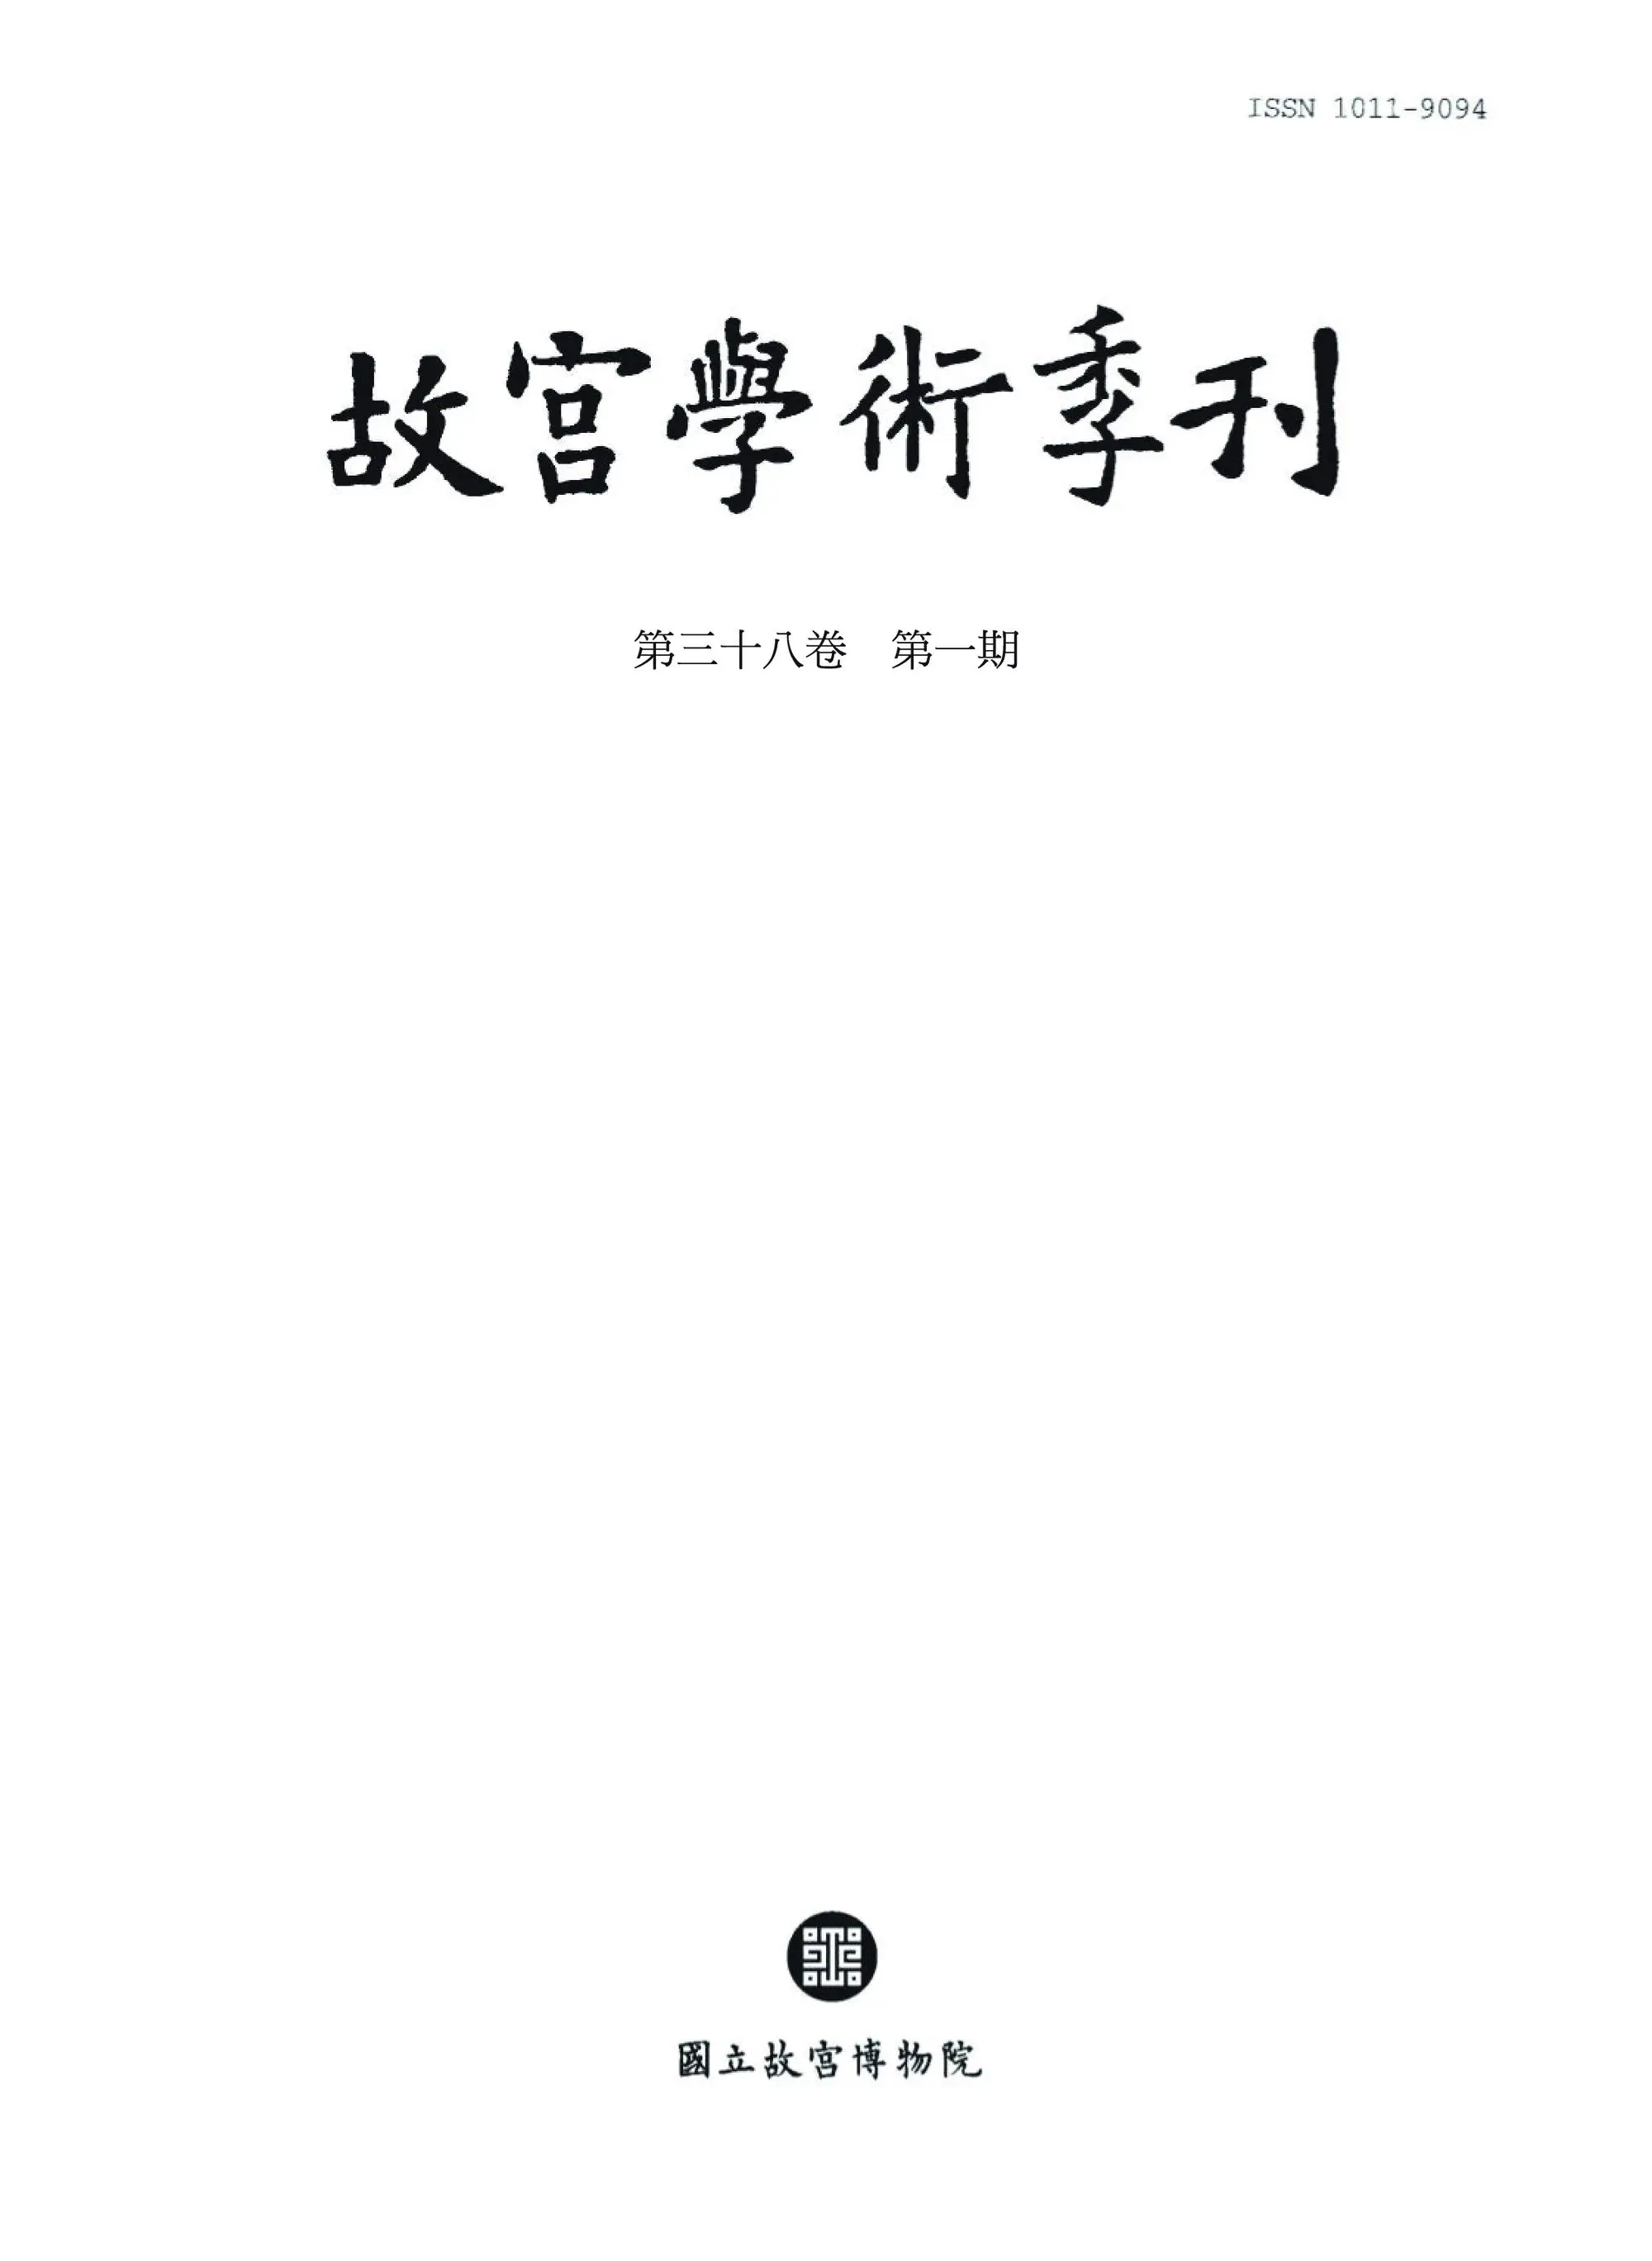 The National Palace Museum Research Quarterly 故宮學術季刊 – 01 一月 2021